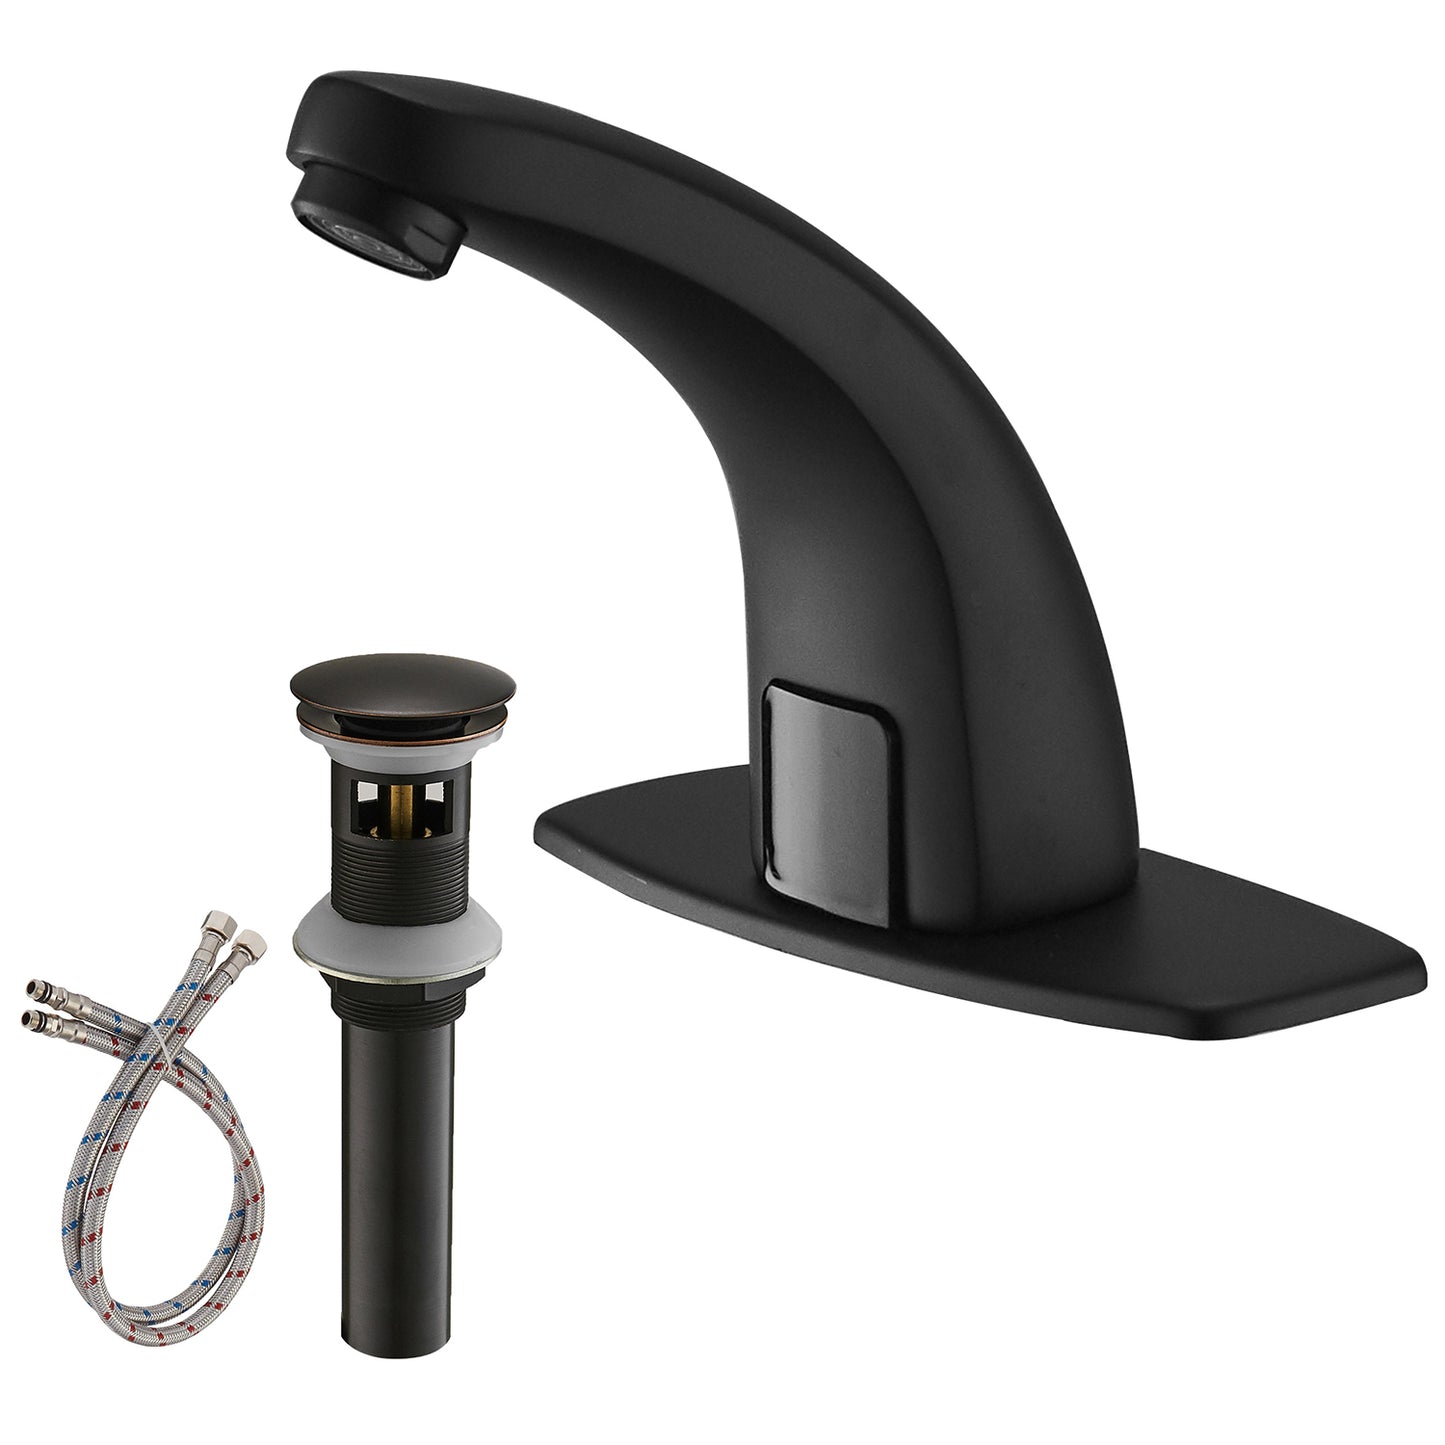 Matte Black DC Powered Touchless Bathroom Faucet with Deck Plate & Pop Up Drain